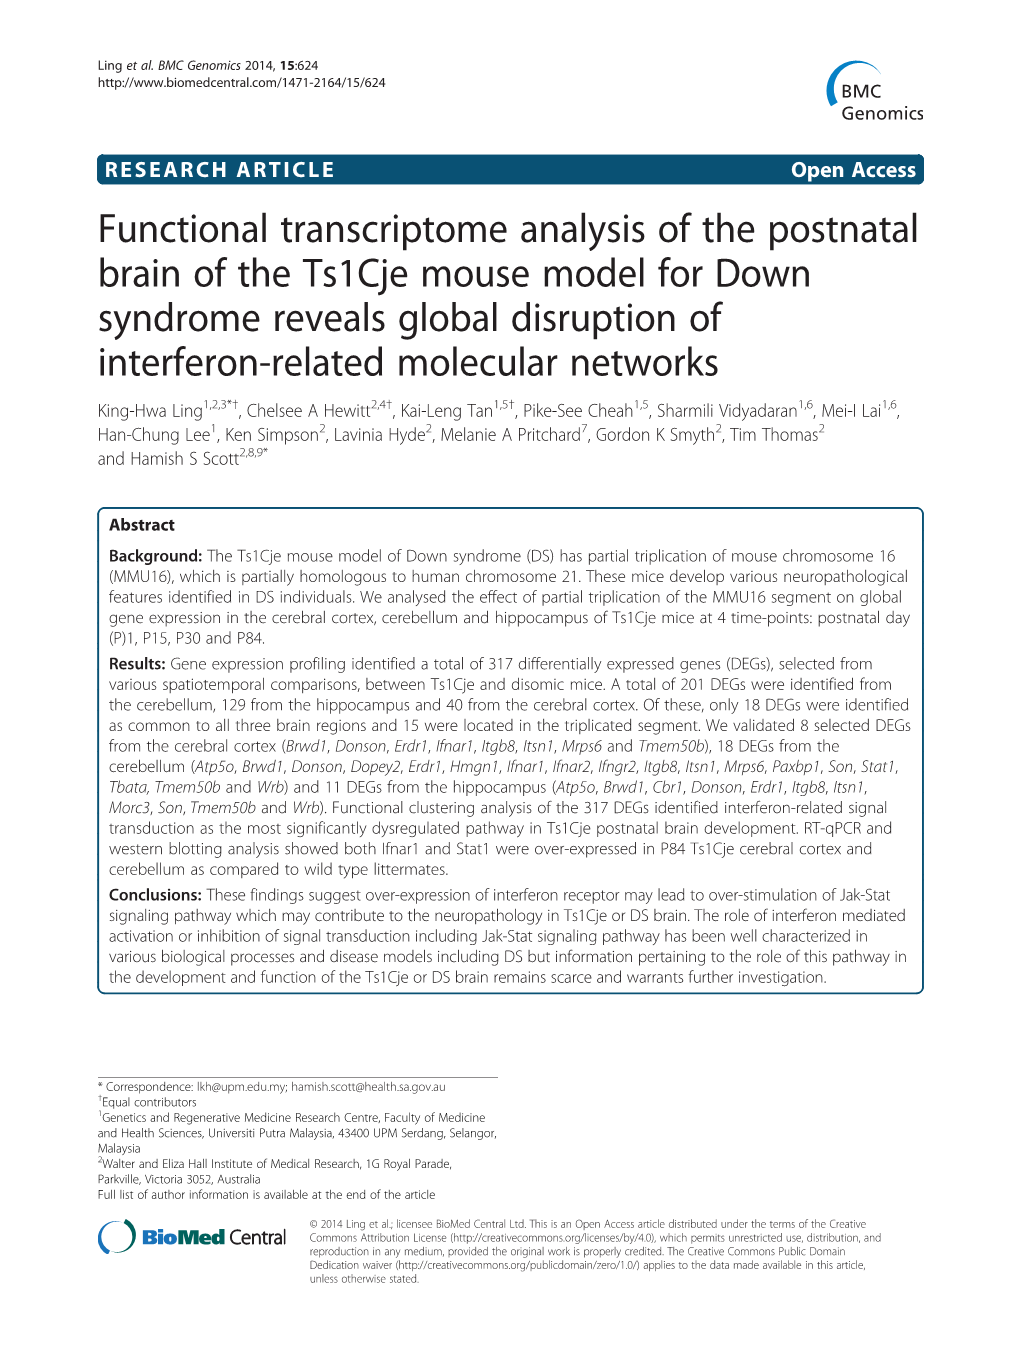 Functional Transcriptome Analysis of the Postnatal Brain of the Ts1cje